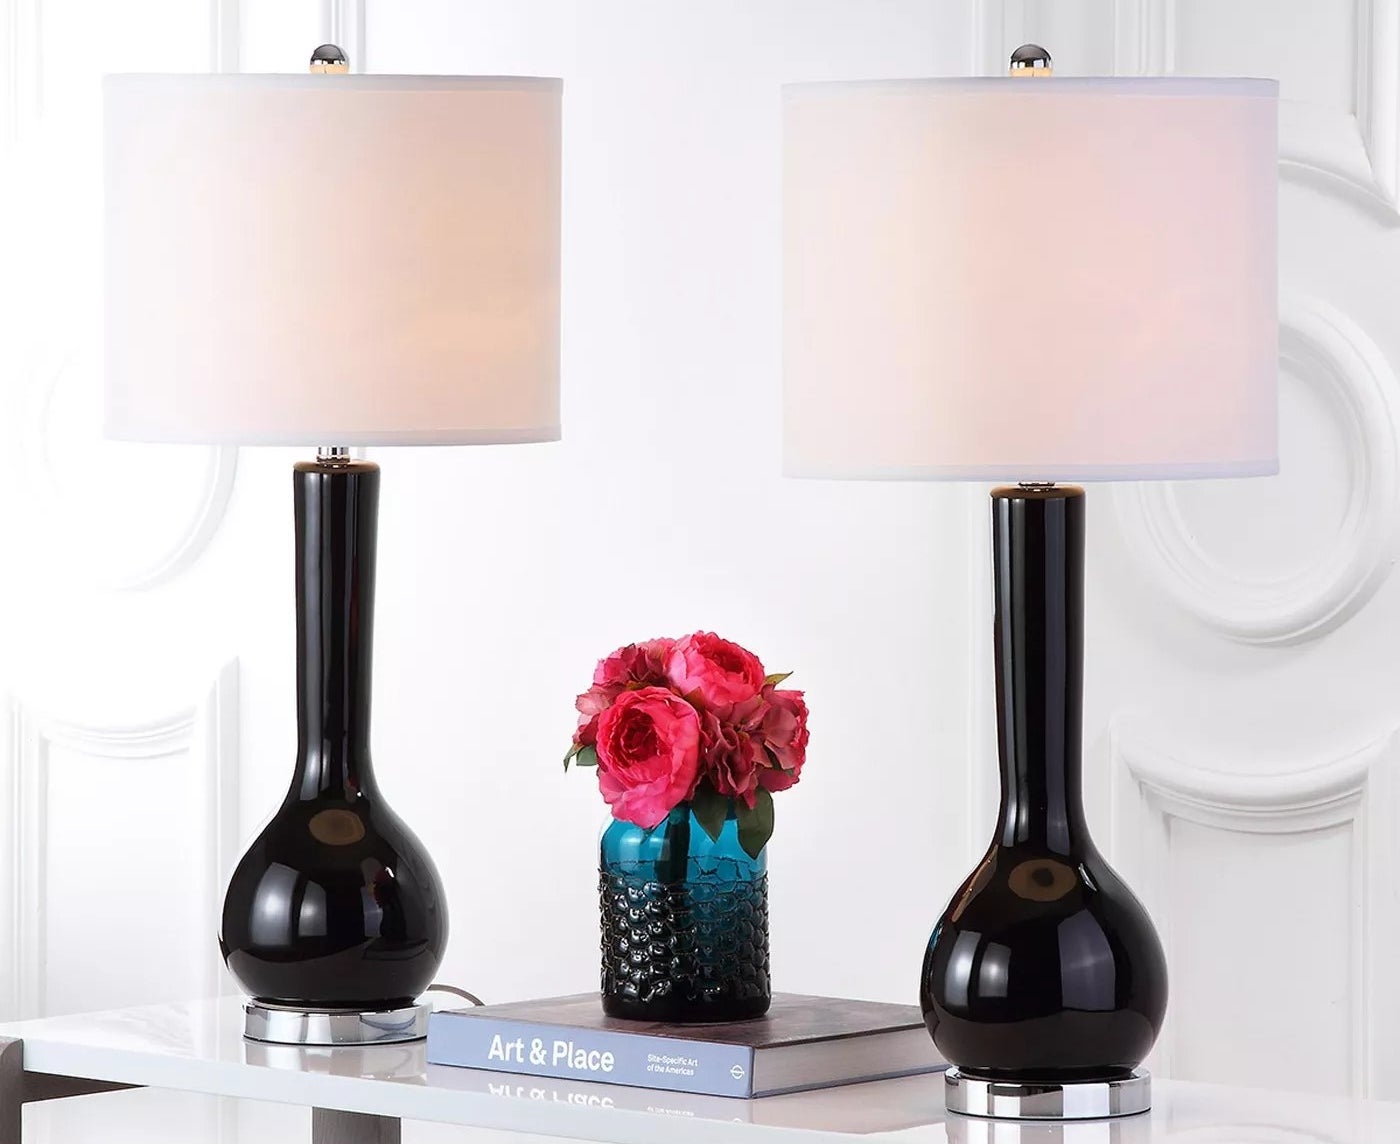 The table lamps in black